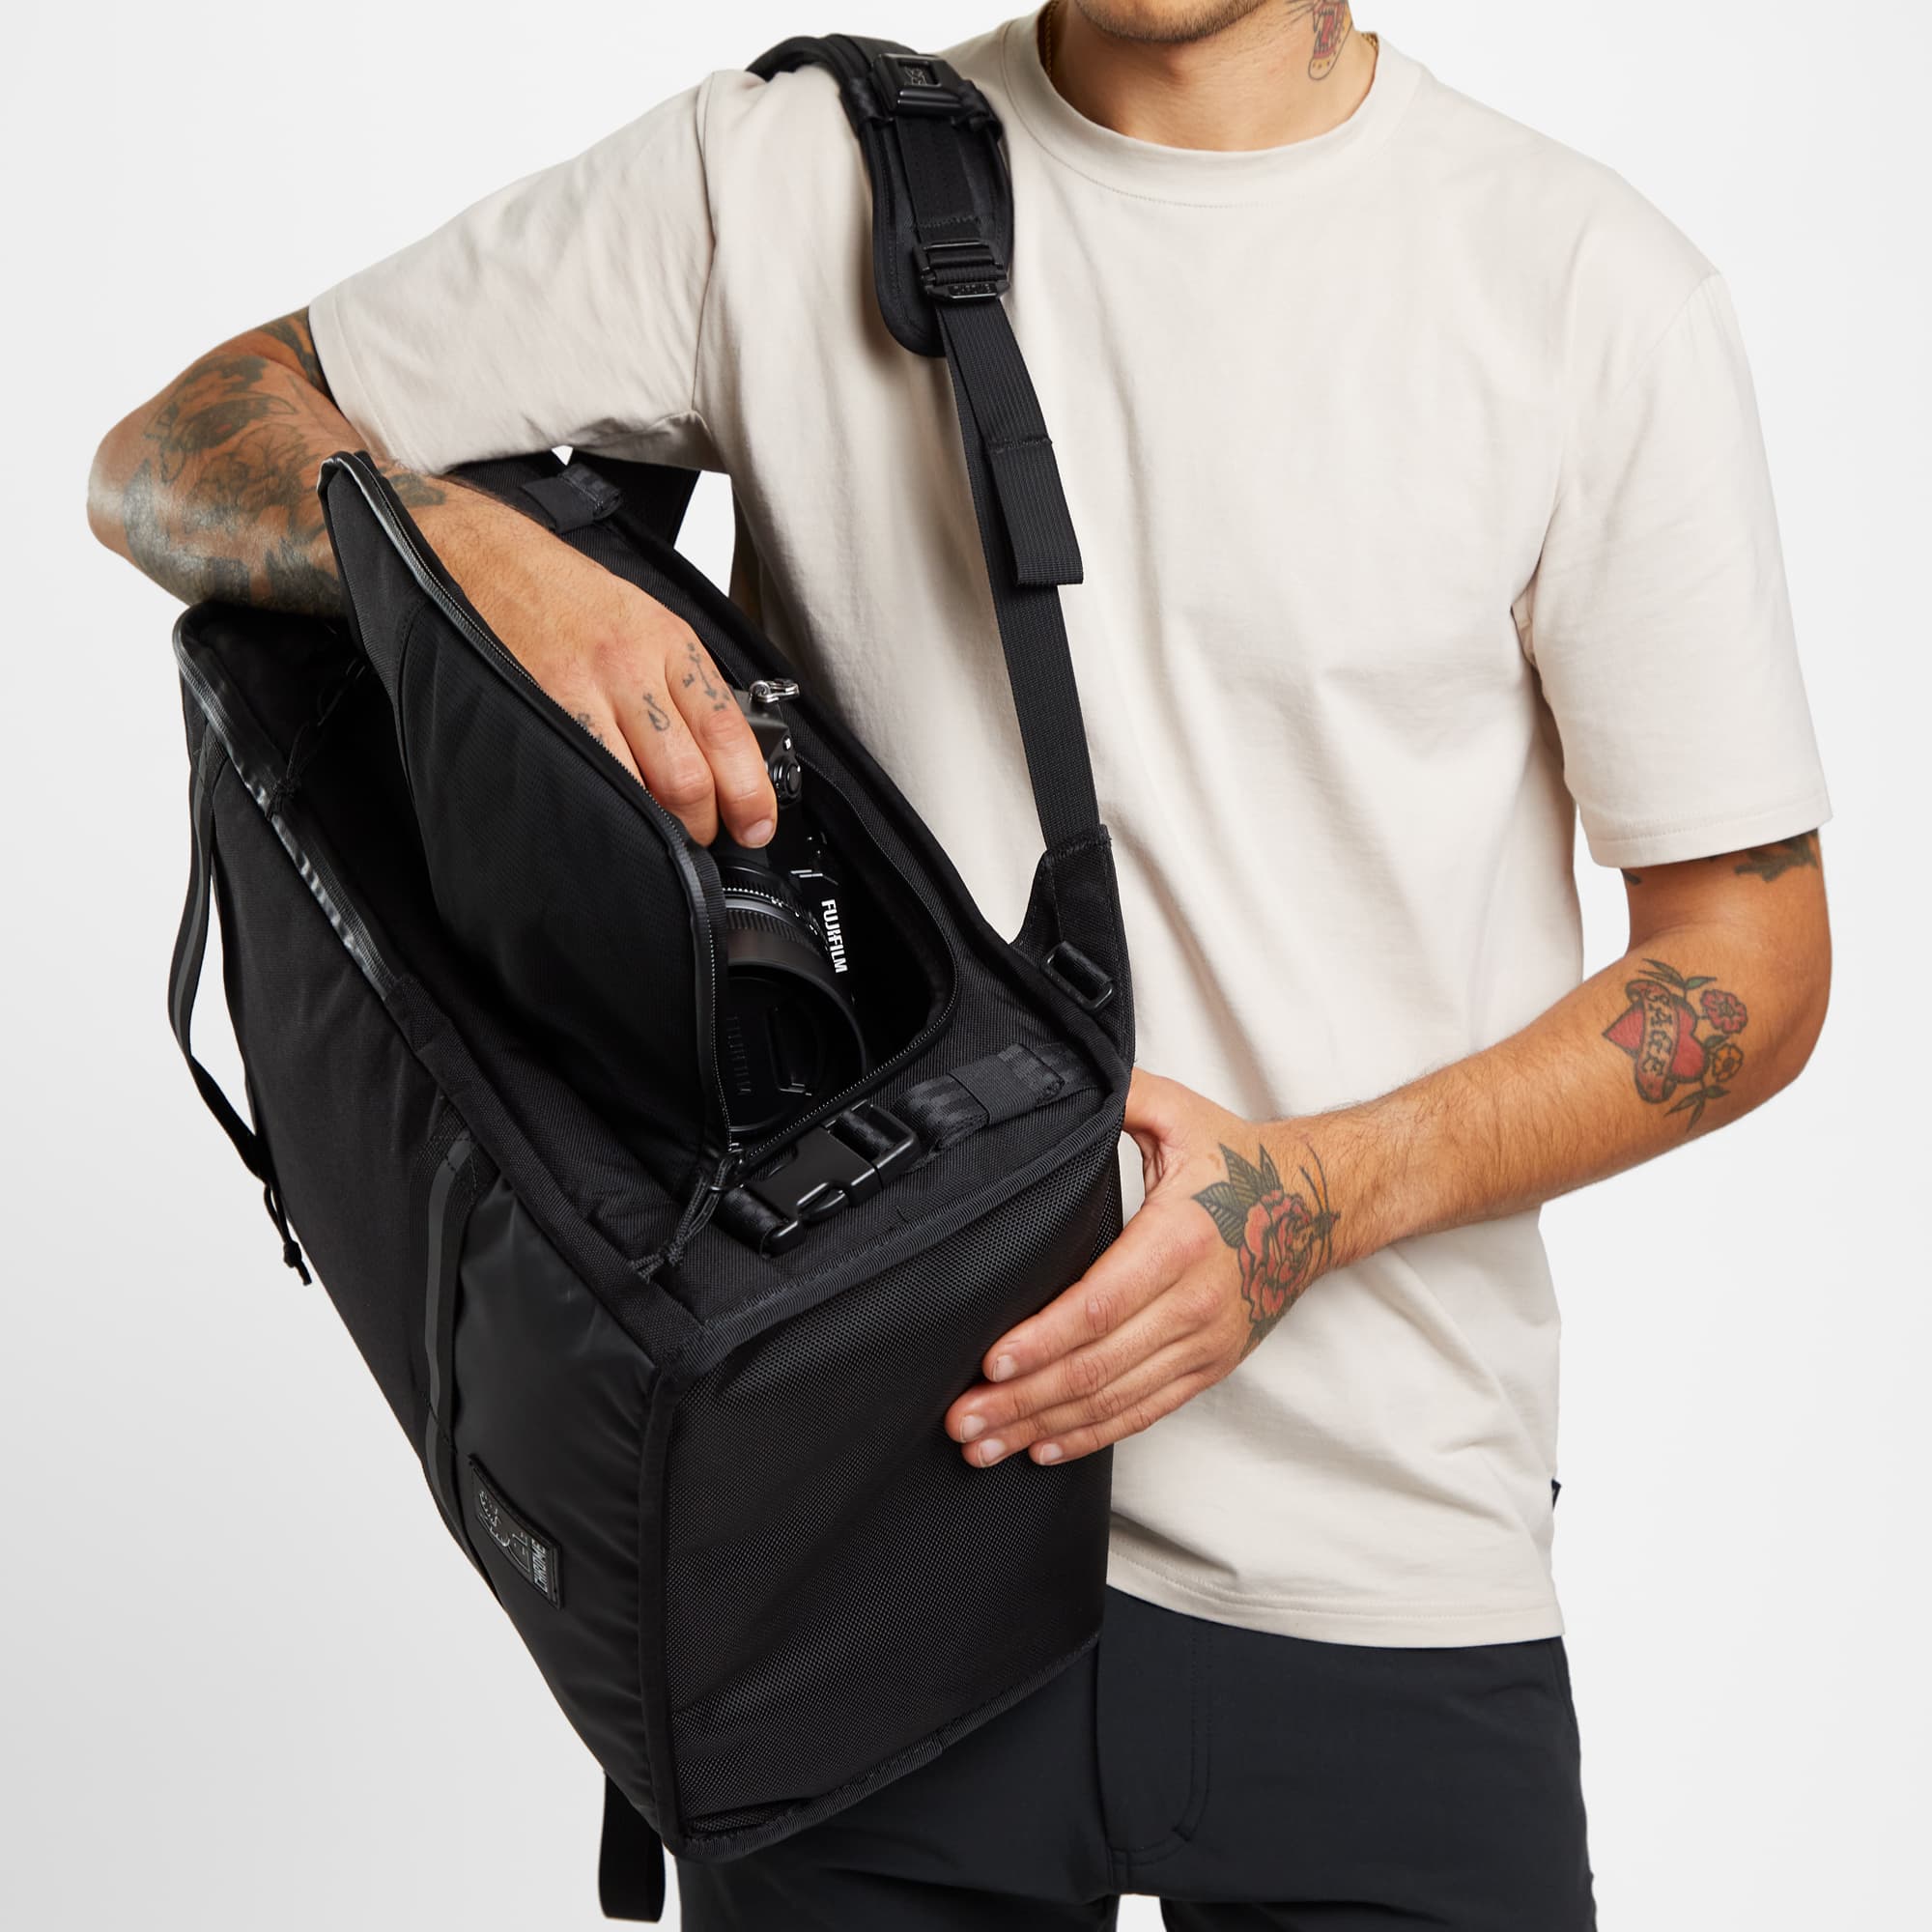 Niko camera tech backpack in black easy side access